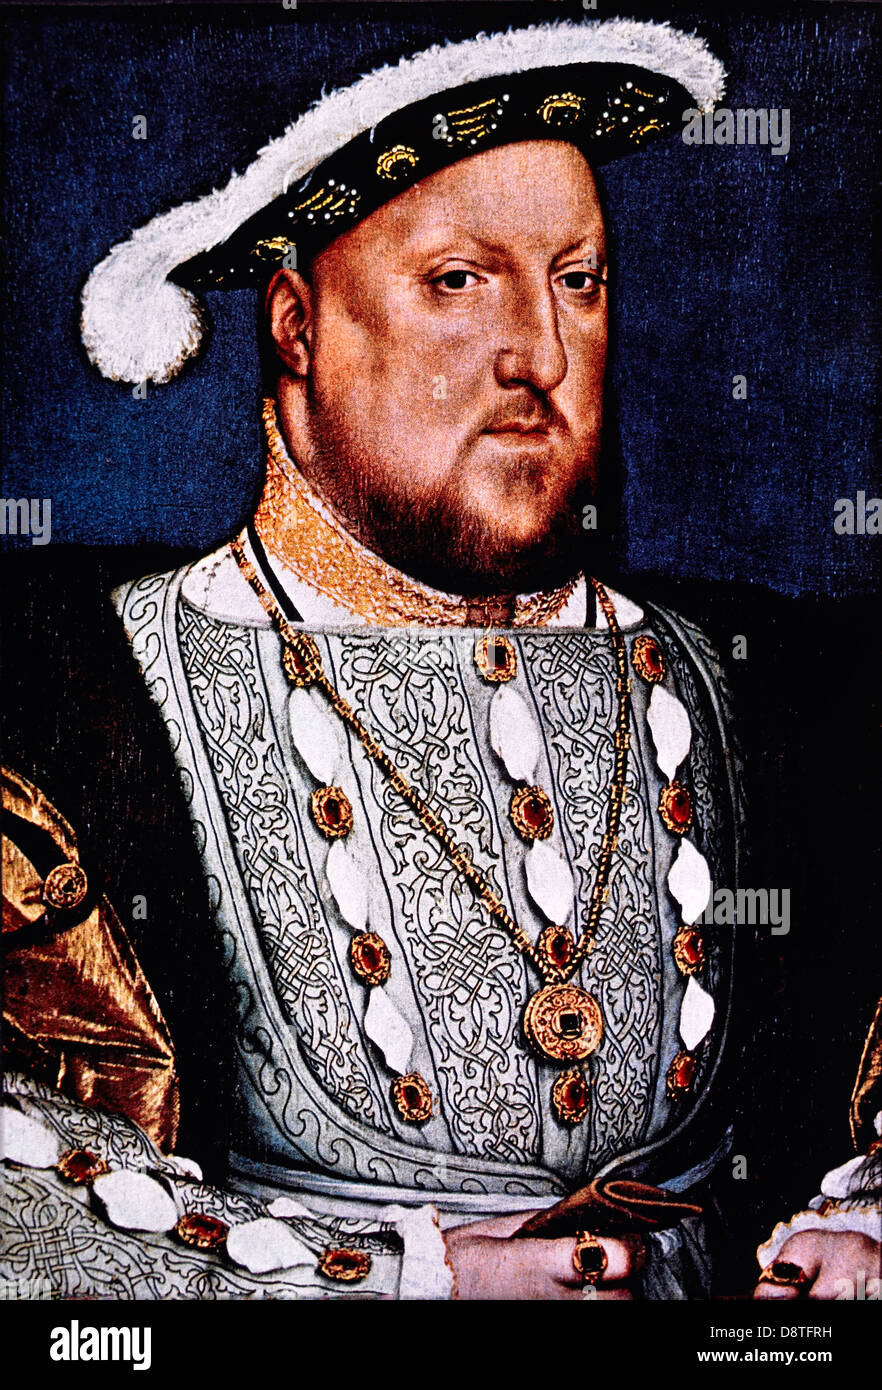 Henry VIII (1491-1547), King of England 1509-47, Portrait by Hans Holbein, 1536 Stock Photo